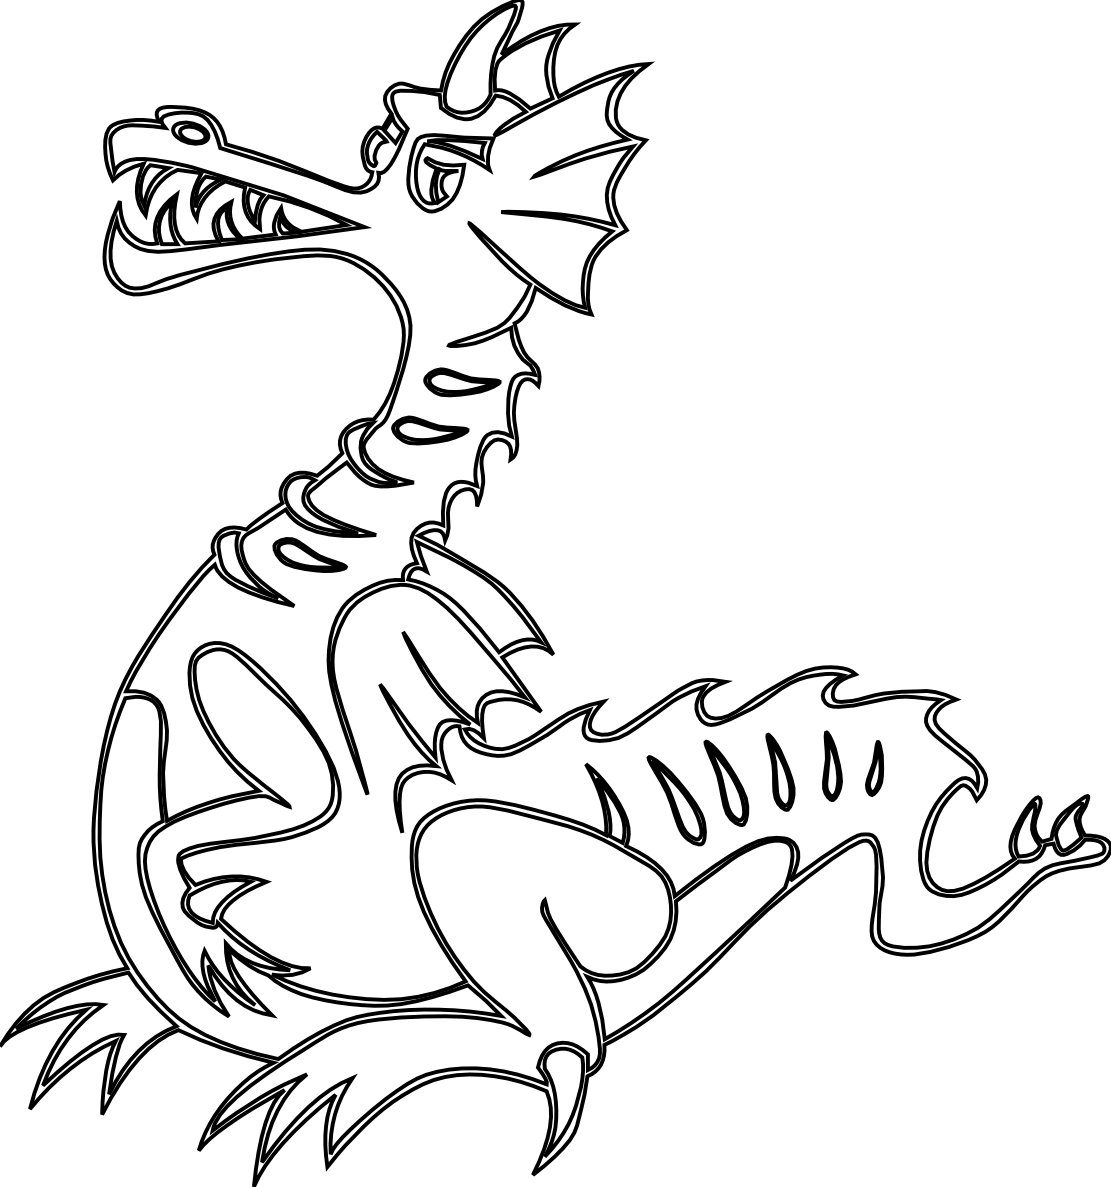 Download 21 black-and-white-dragon-pictures cartoon-dragon-clipart.-Royalty-free-clipart-132043.gif